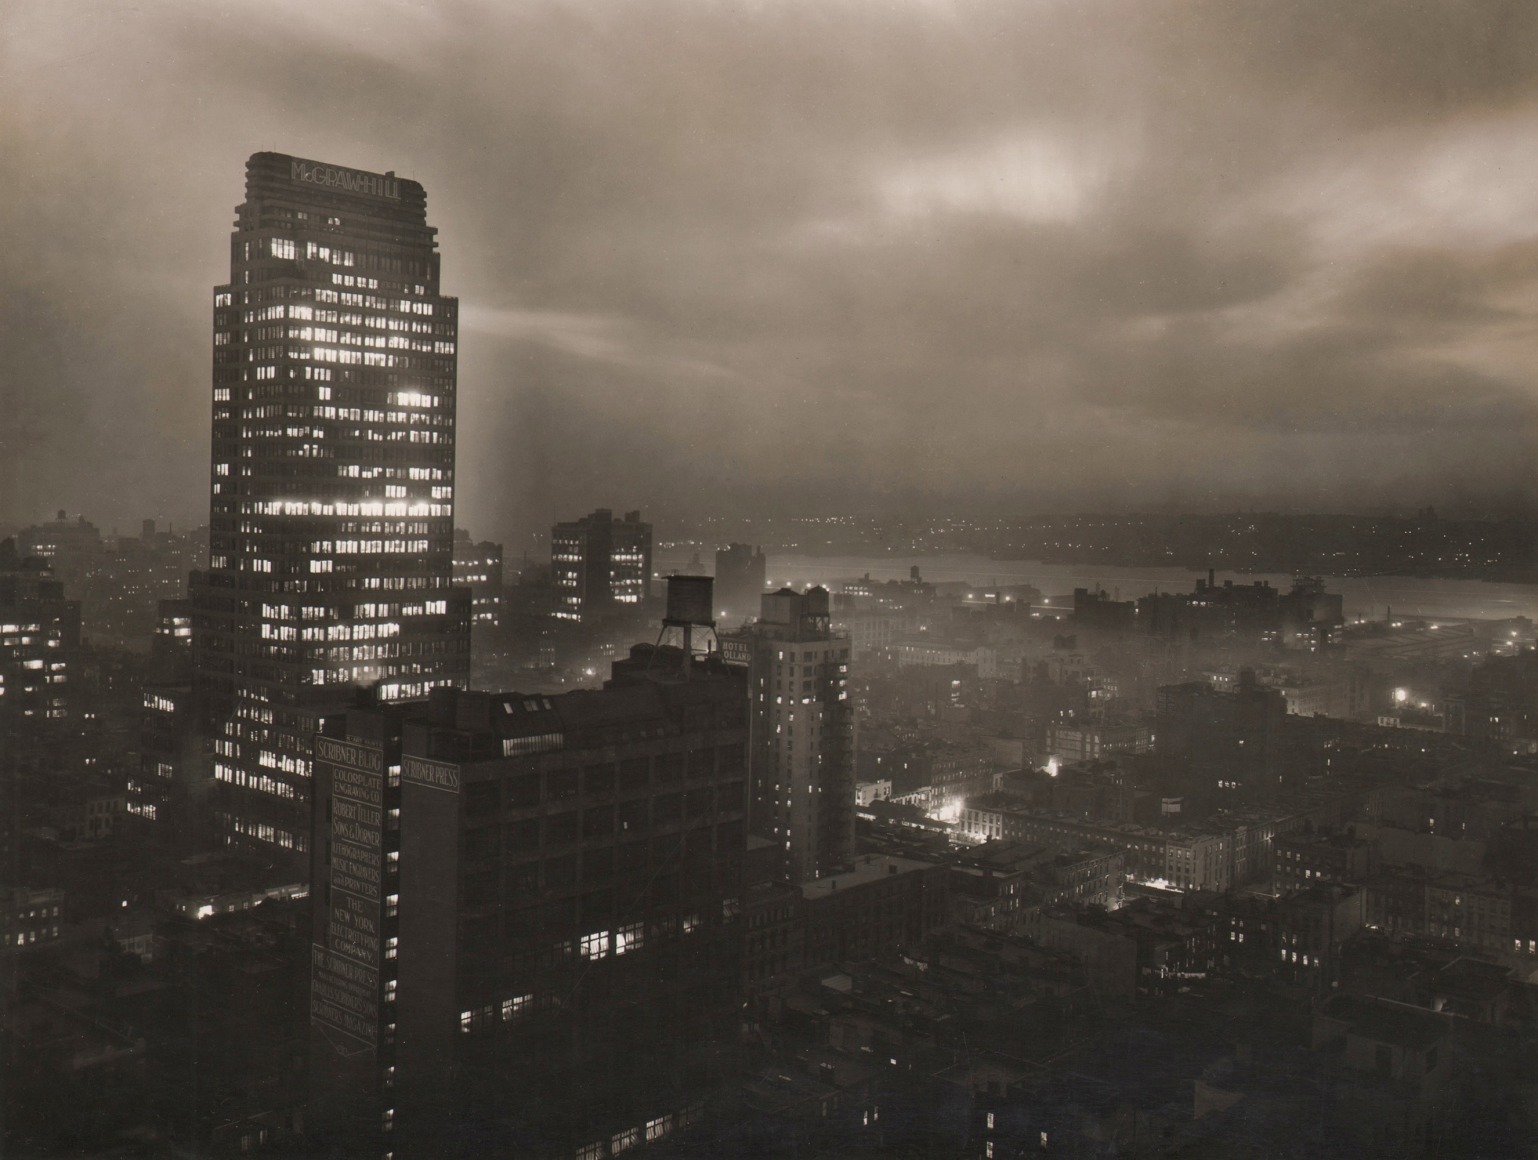 Paul J. Woolf, McGraw Hill Building &amp; Hudson River from Roof of the Hotel Lincoln, ​c. 1935. Night time cityscape with tell McGraw Hill Building in center left of the frame beneath overcast sky.